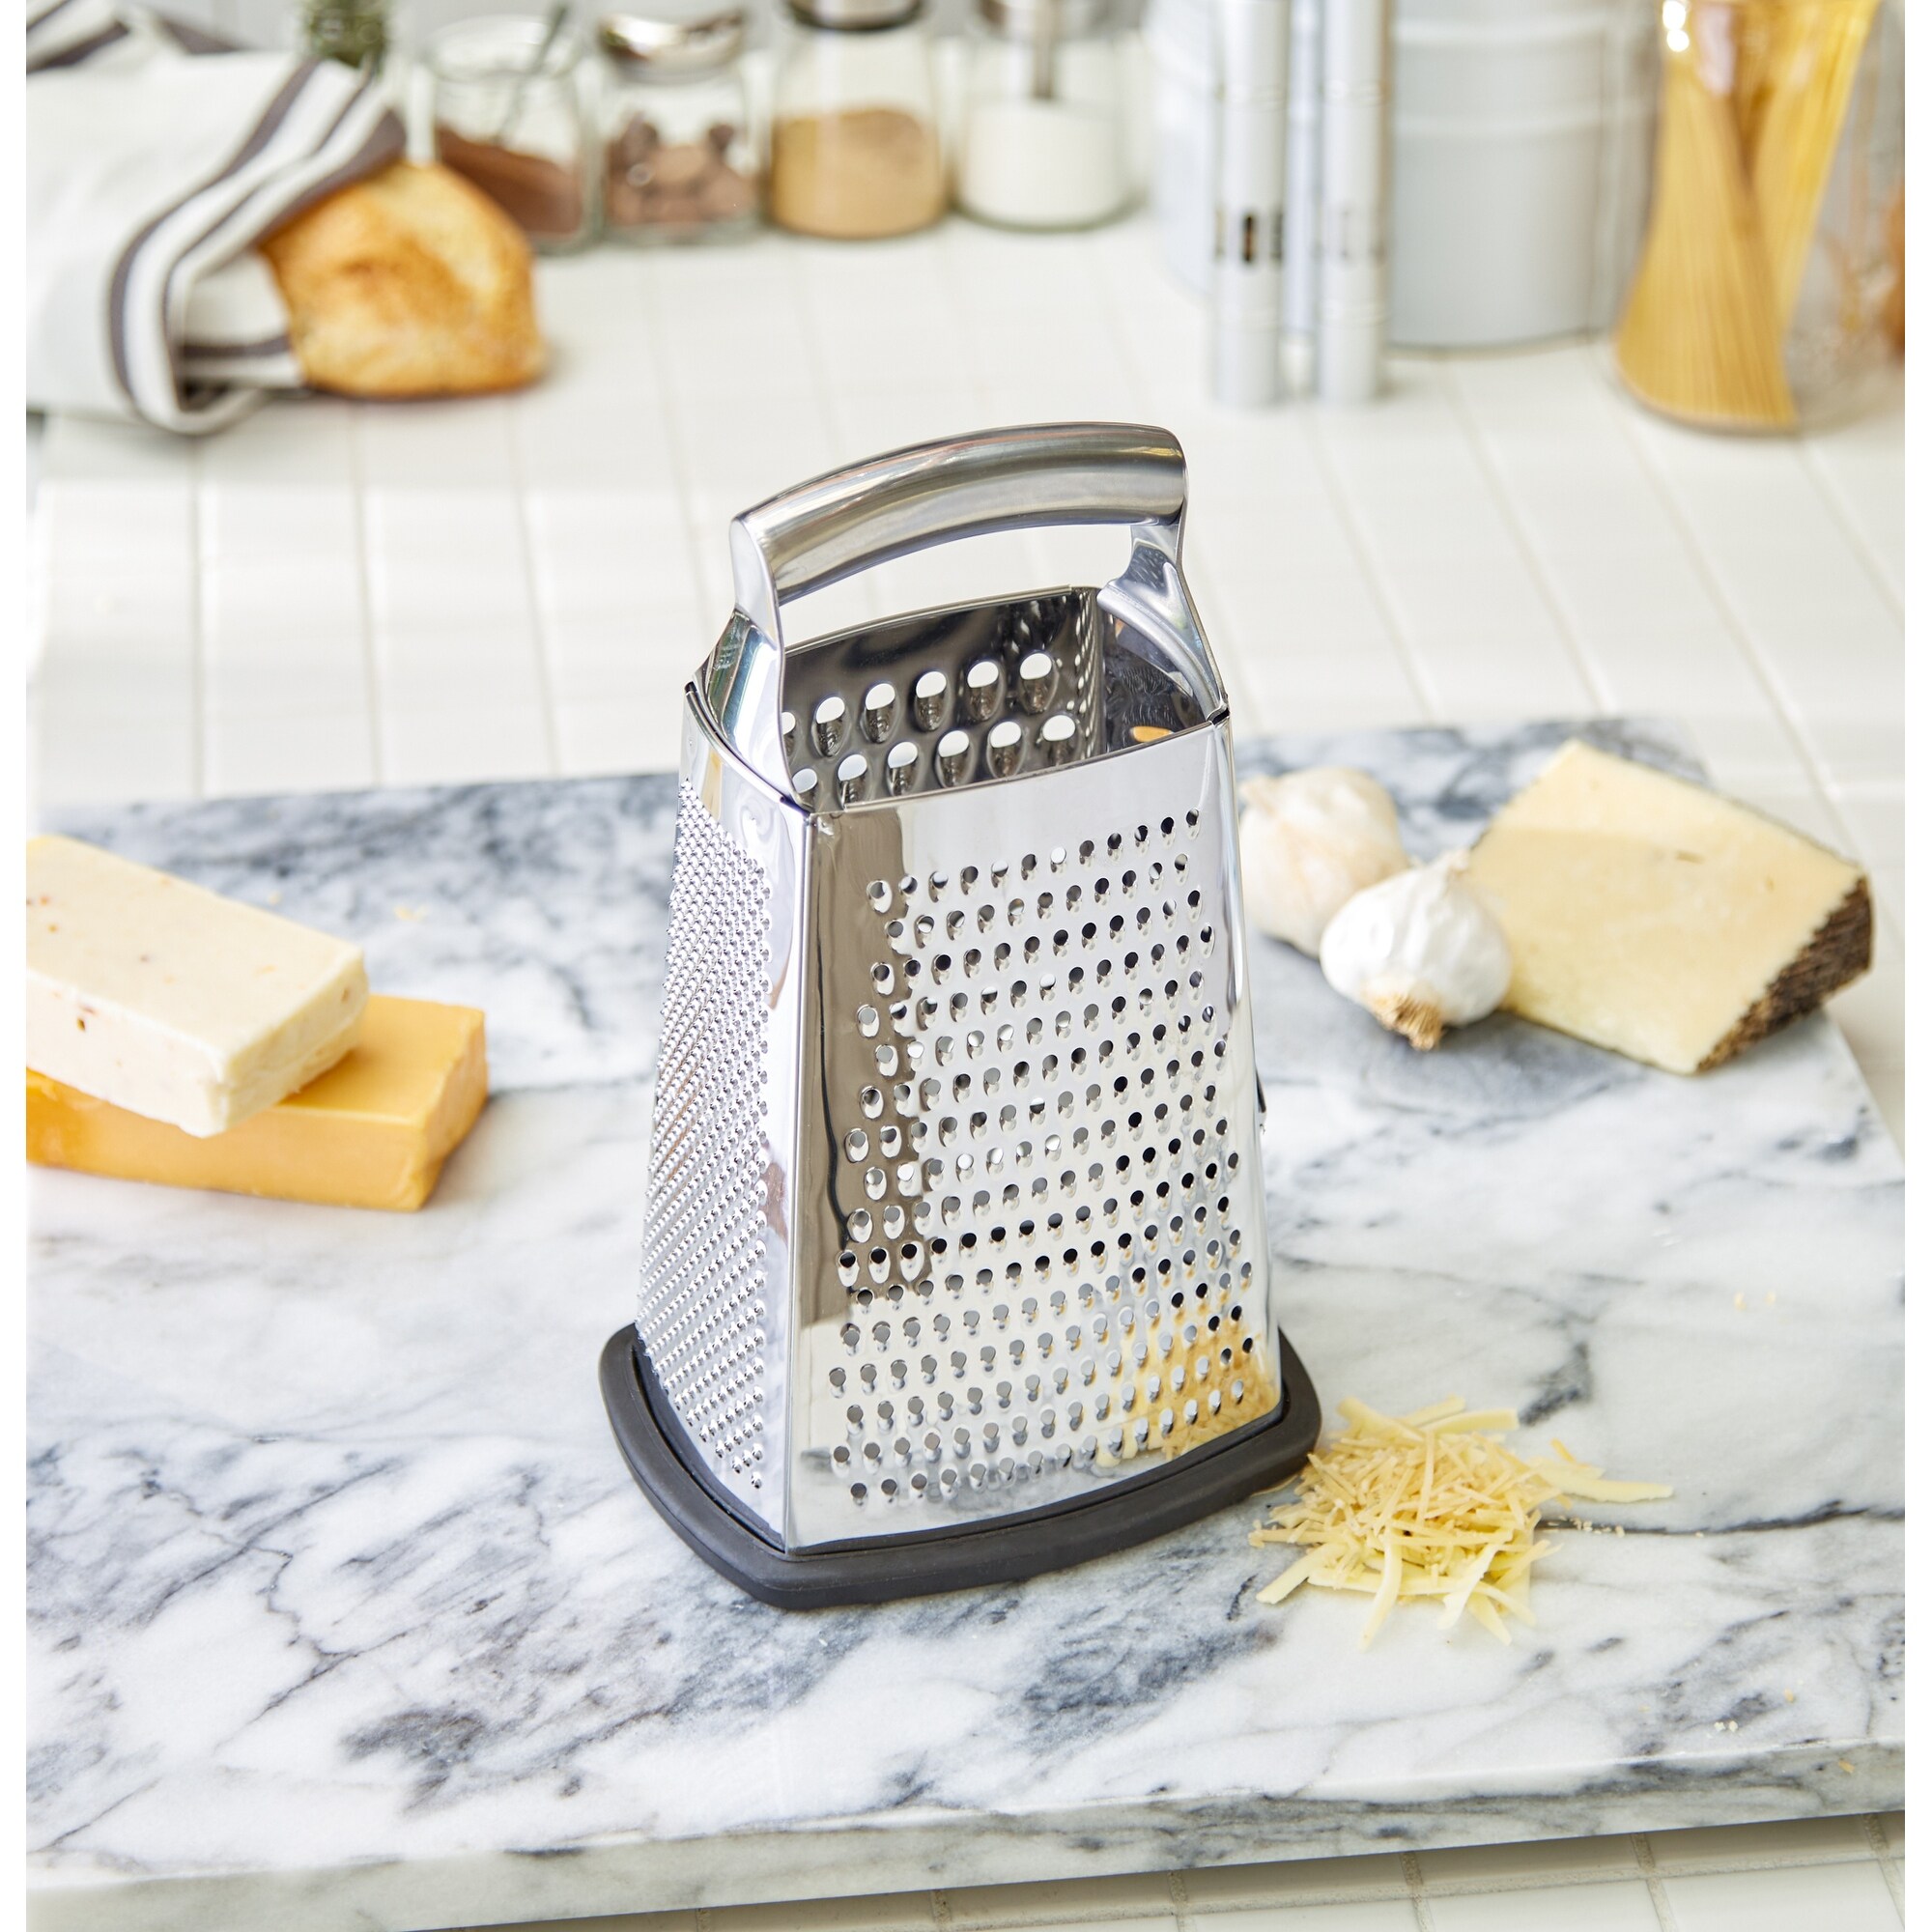 https://ak1.ostkcdn.com/images/products/is/images/direct/720162c6e31e865b421c565ee2432ee326e792eb/Deluxe-Handheld-Box-Grater.jpg